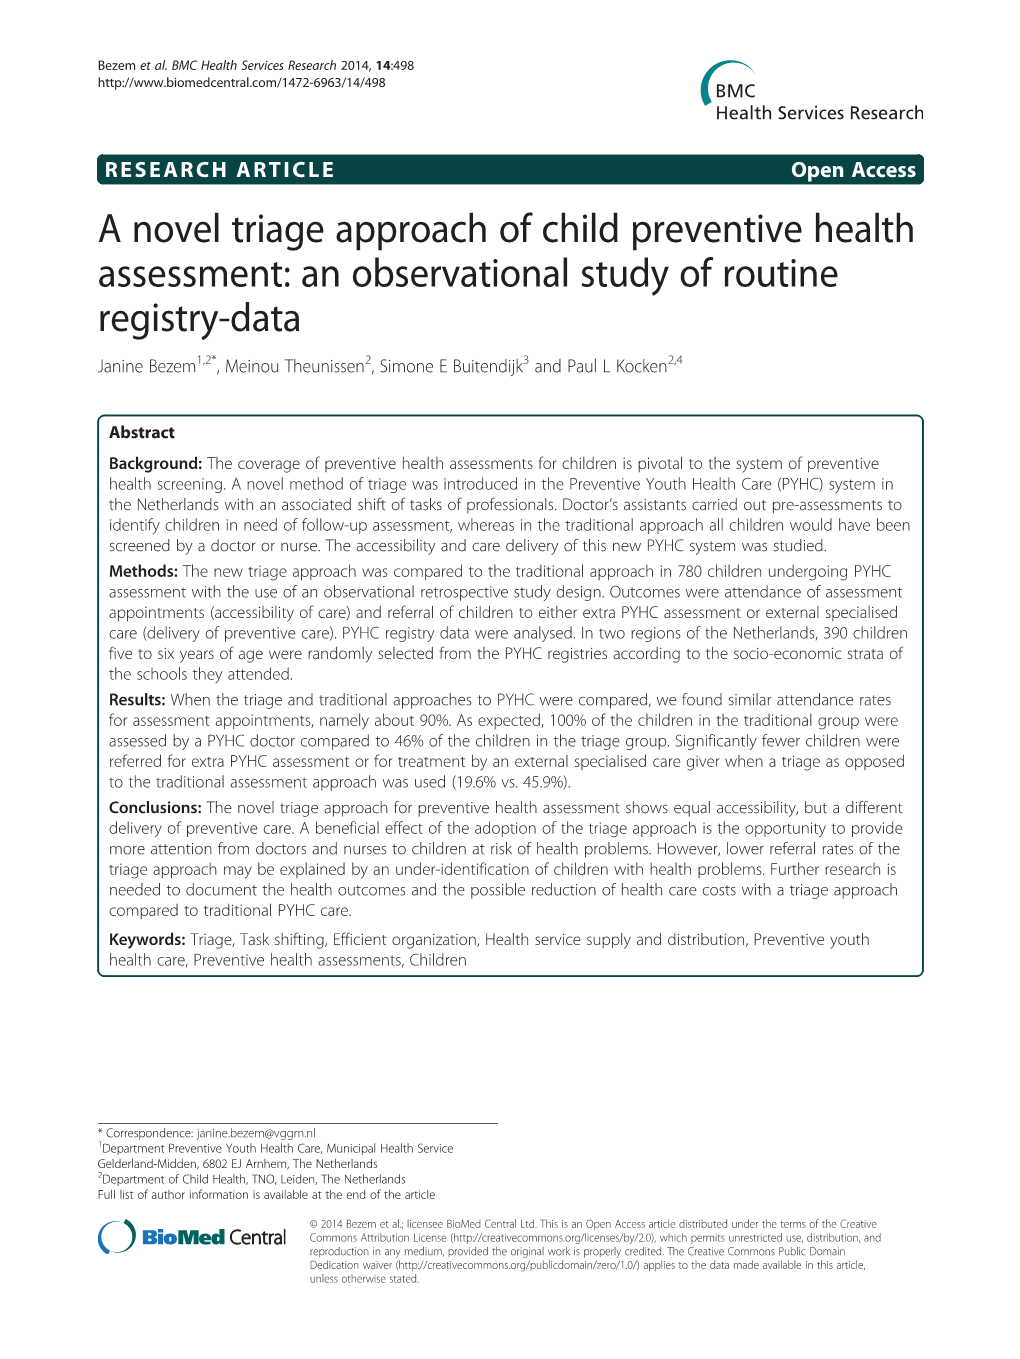 A Novel Triage Approach of Child Preventive Health